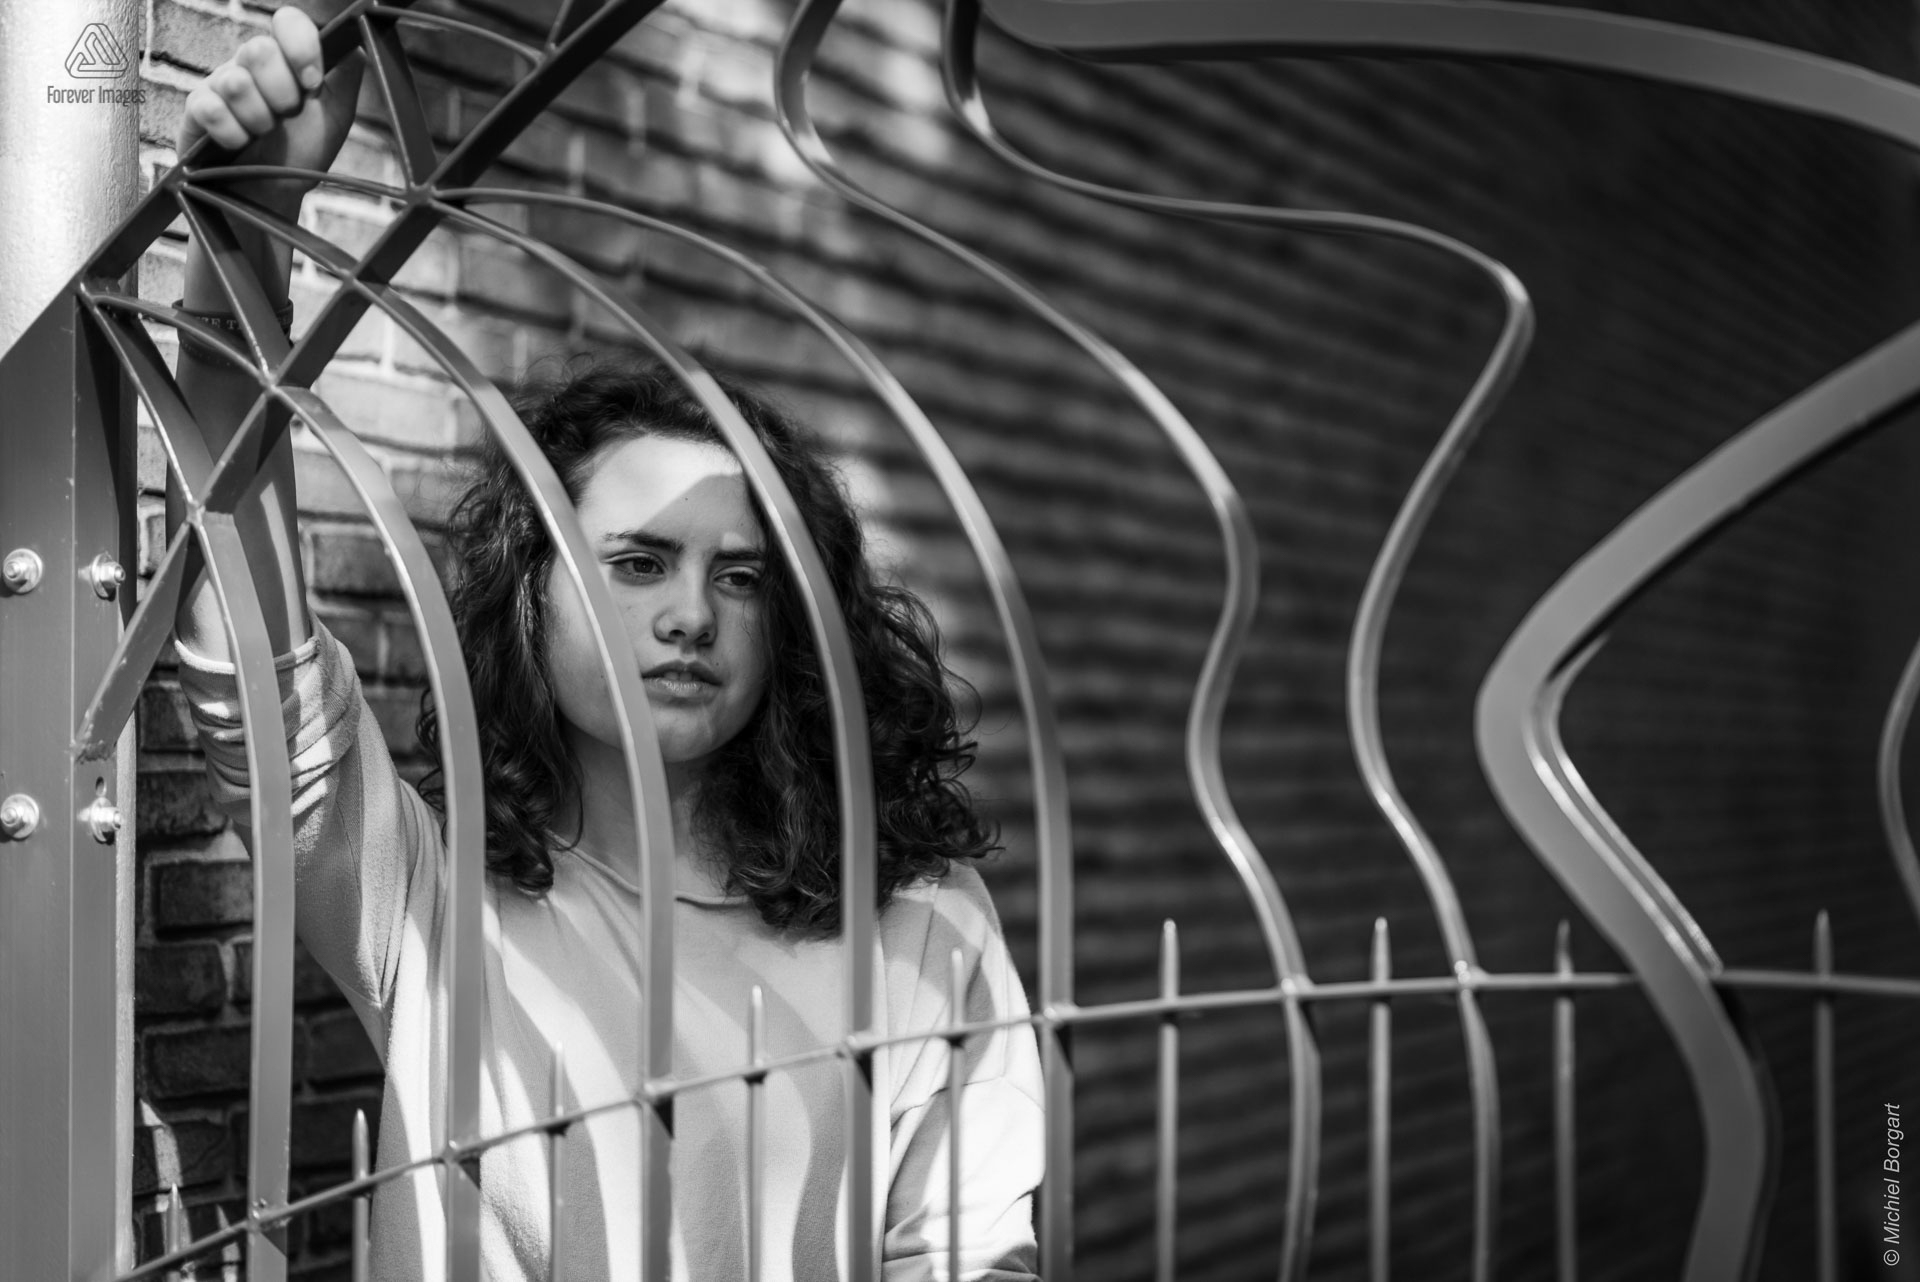 Portrait photo black and white B&W young lady hold fence and look sideways | Tessa Holscher | Portrait Photographer Michiel Borgart - Forever Images.